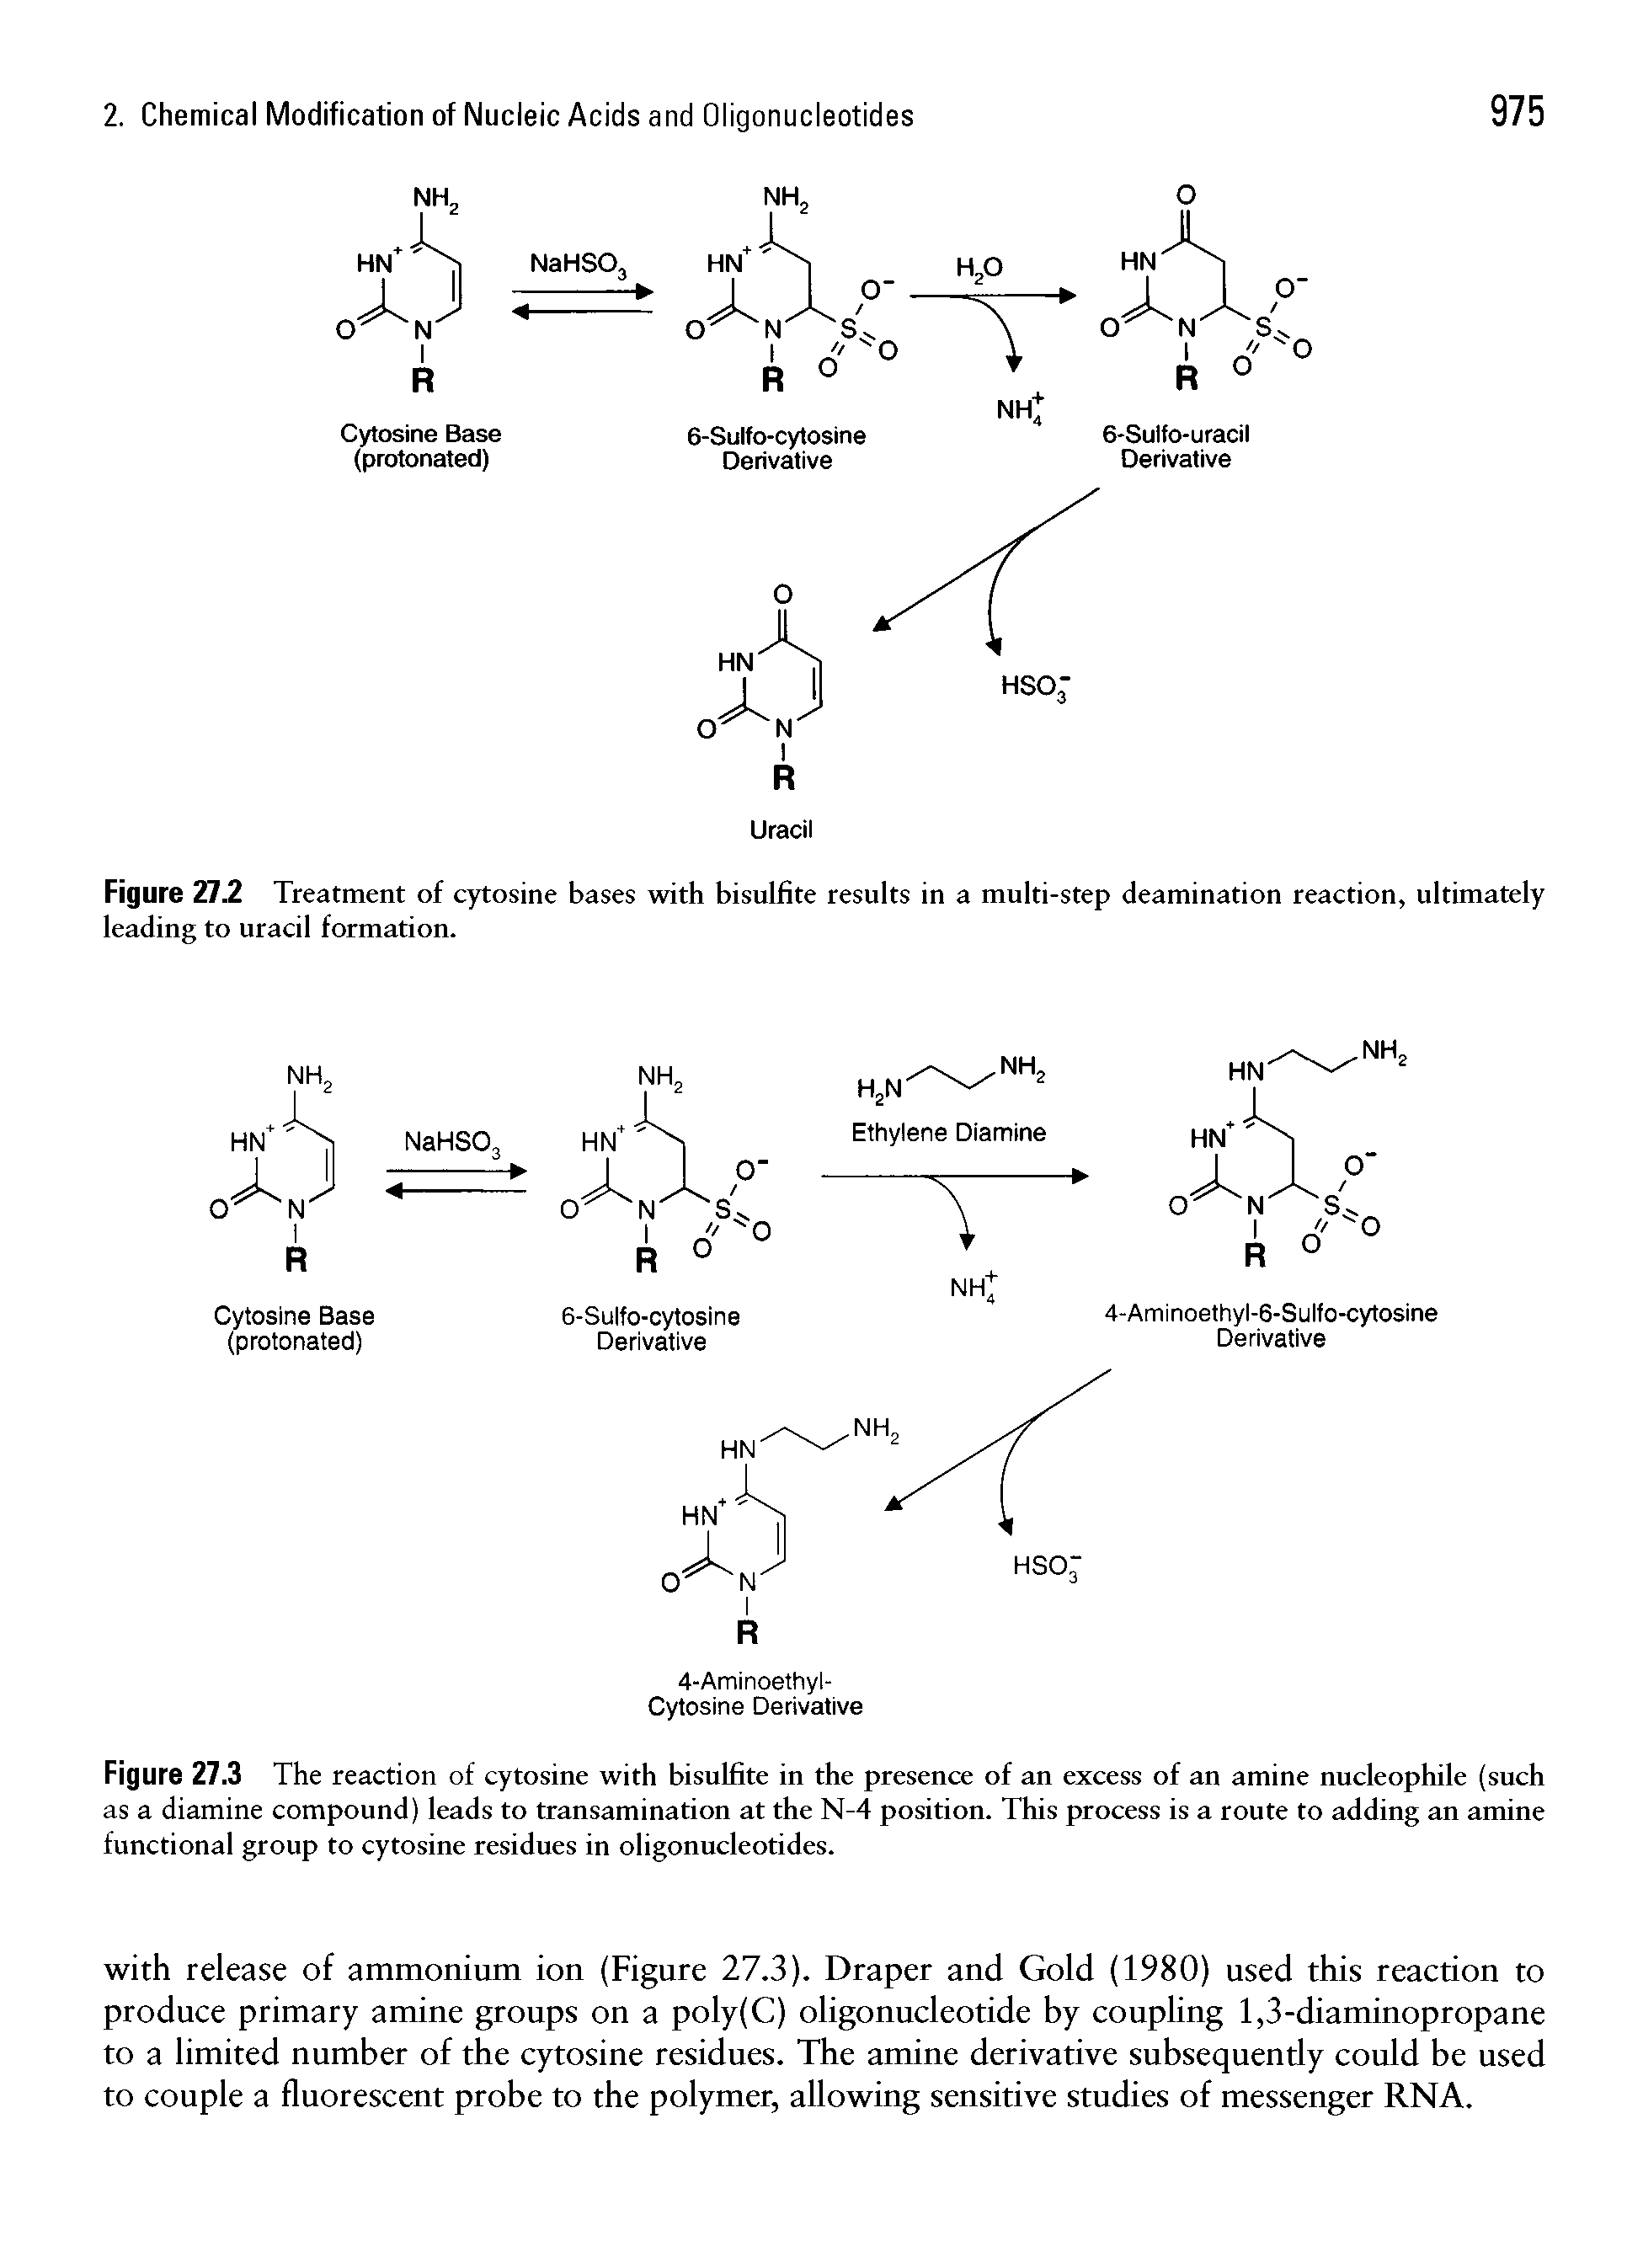 Figure 27.3 The reaction of cytosine with bisulfite in the presence of an excess of an amine nucleophile (such as a diamine compound) leads to transamination at the N-4 position. This process is a route to adding an amine functional group to cytosine residues in oligonucleotides.